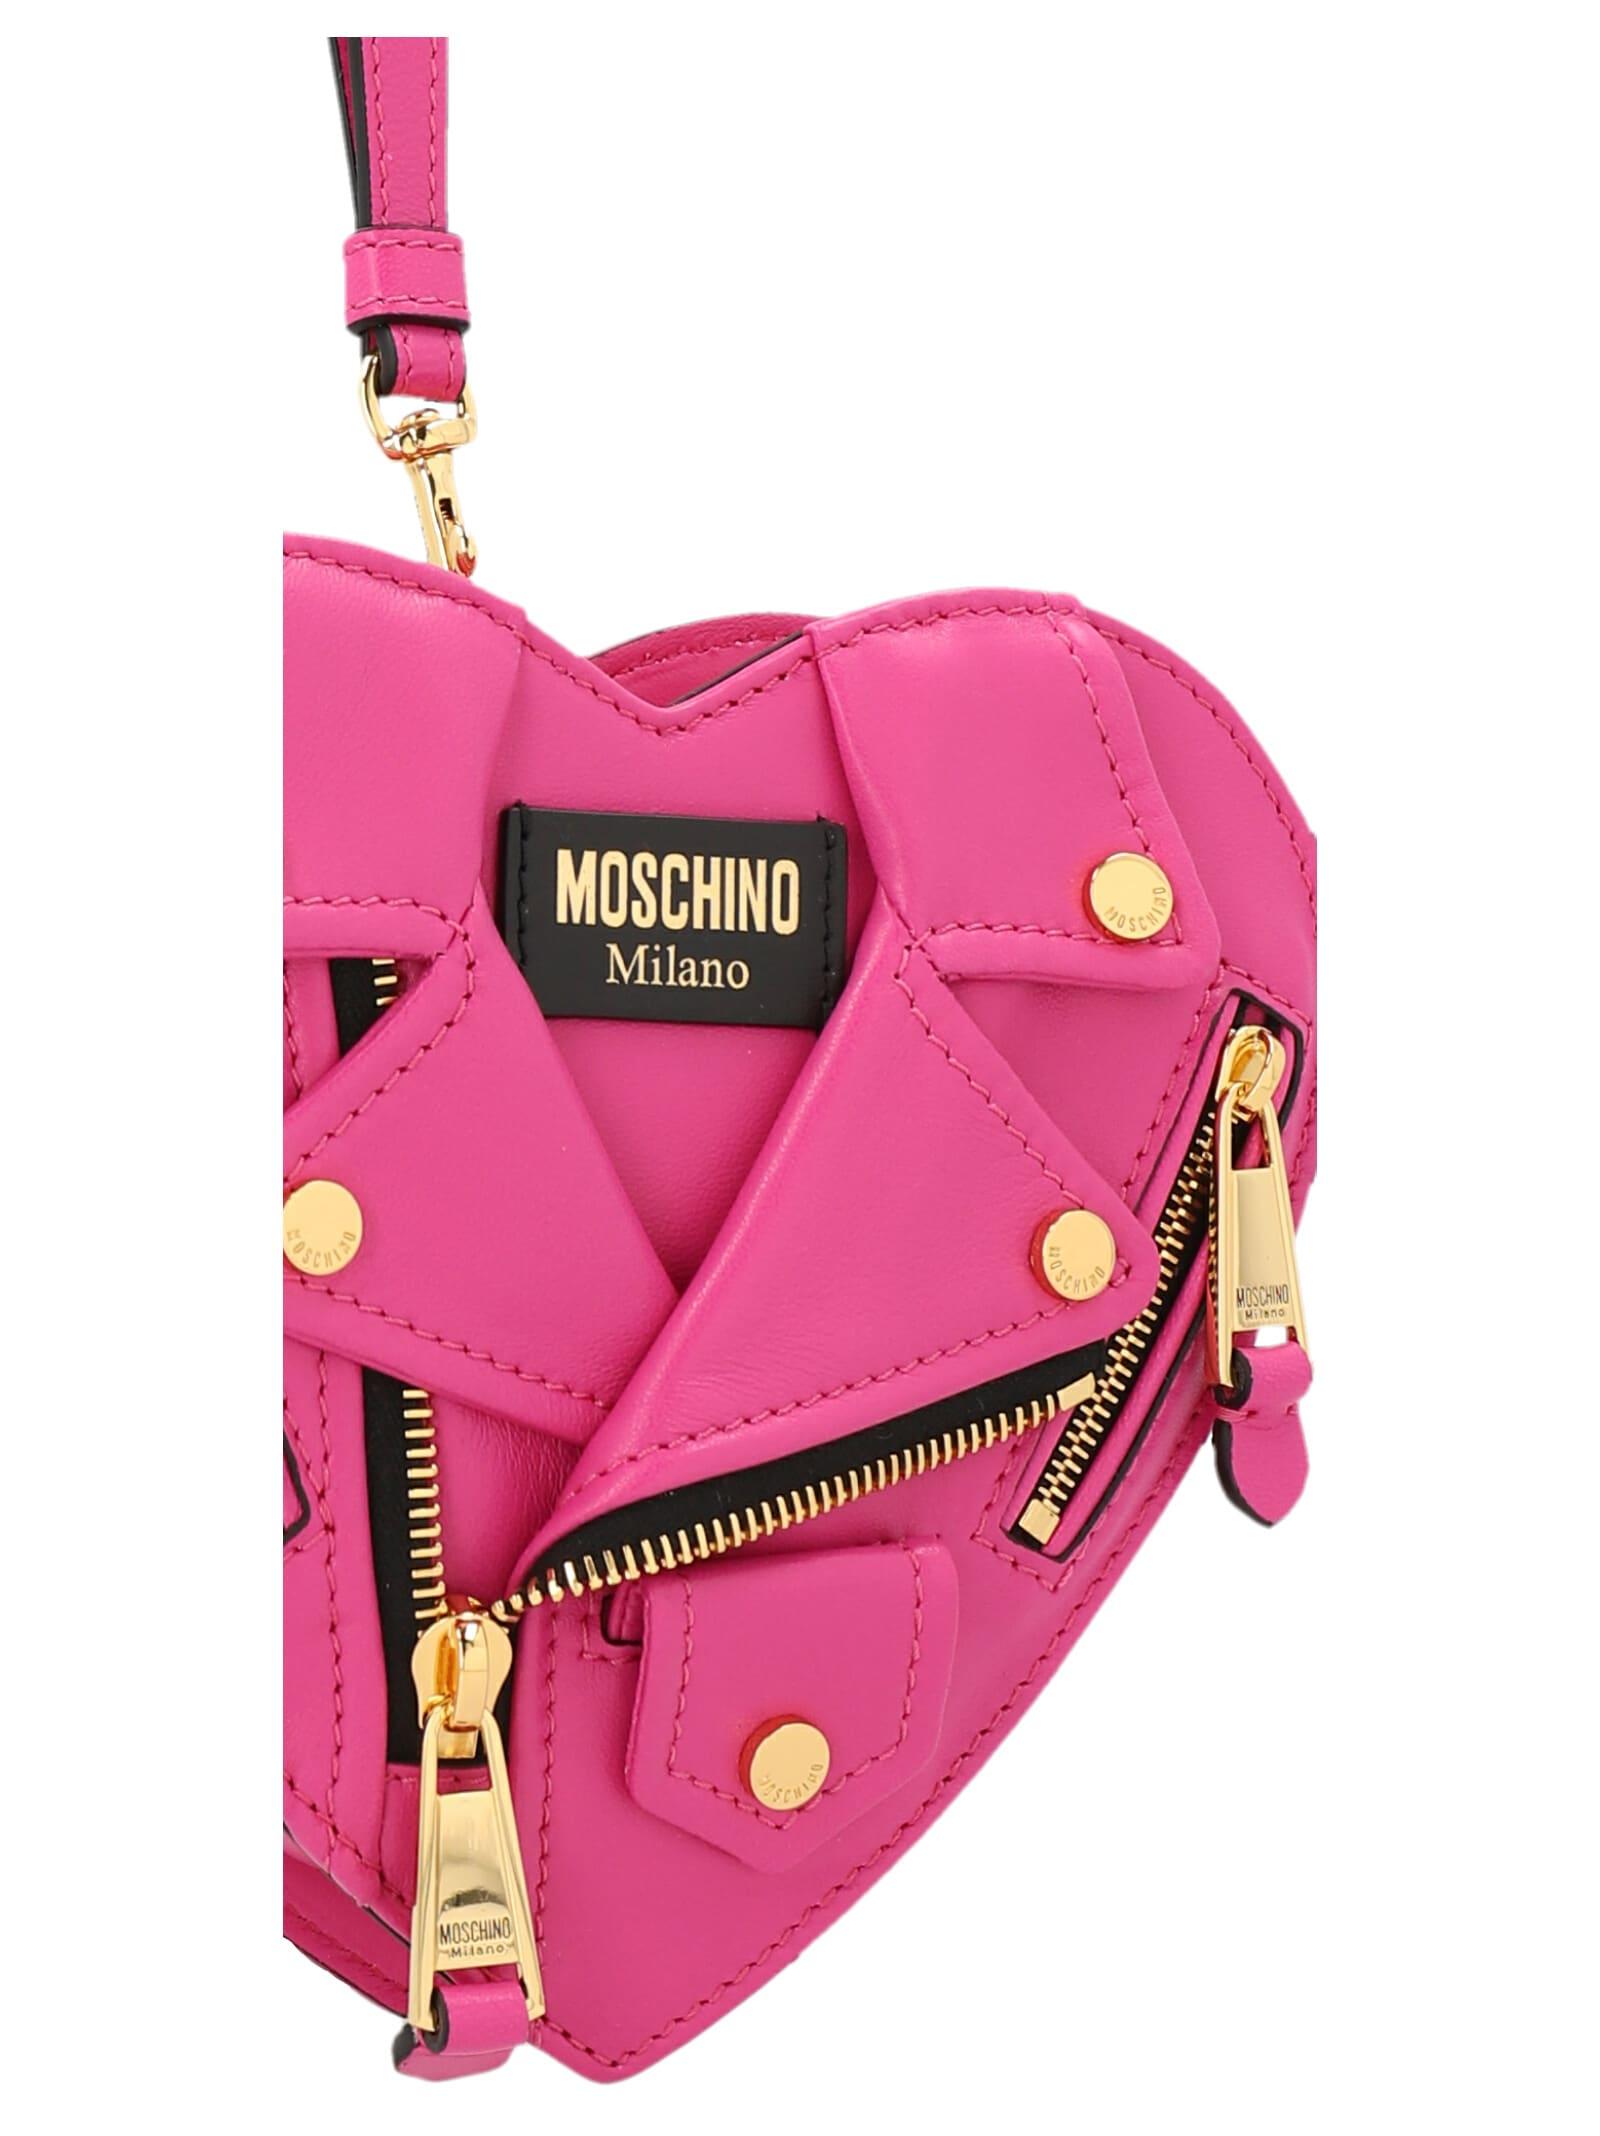 Moschino Cuore Crossbody Bag in Pink | Lyst